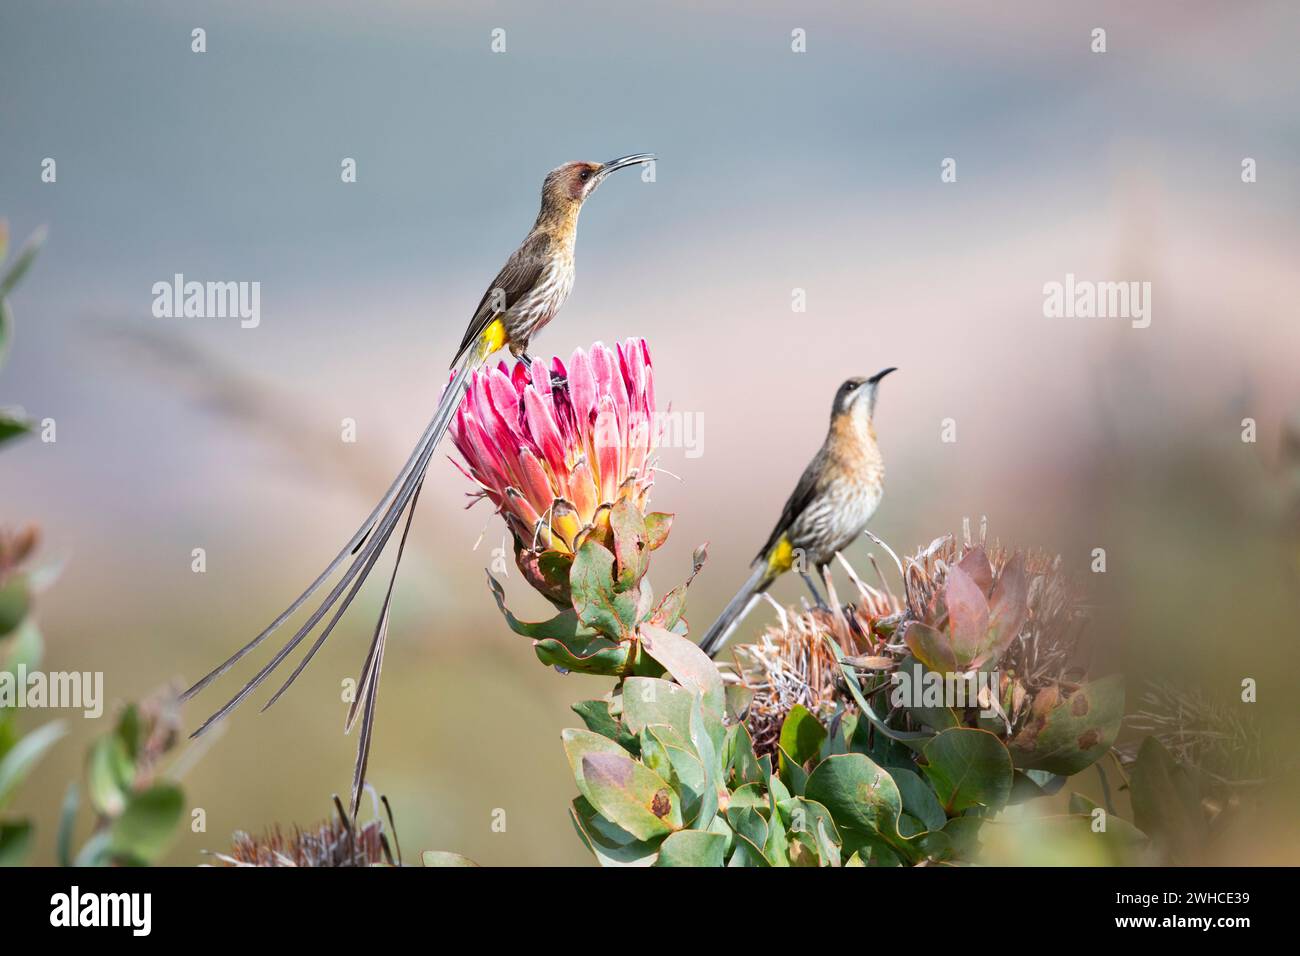 South Africa, Western Cape Province, Swartberg Pass, Cape Sugarbird, Promerops cafer, Fynbos, Sugarbush Protea, Protea repens, Endemic species to South Africa, Nature Reserve, Stock Photo